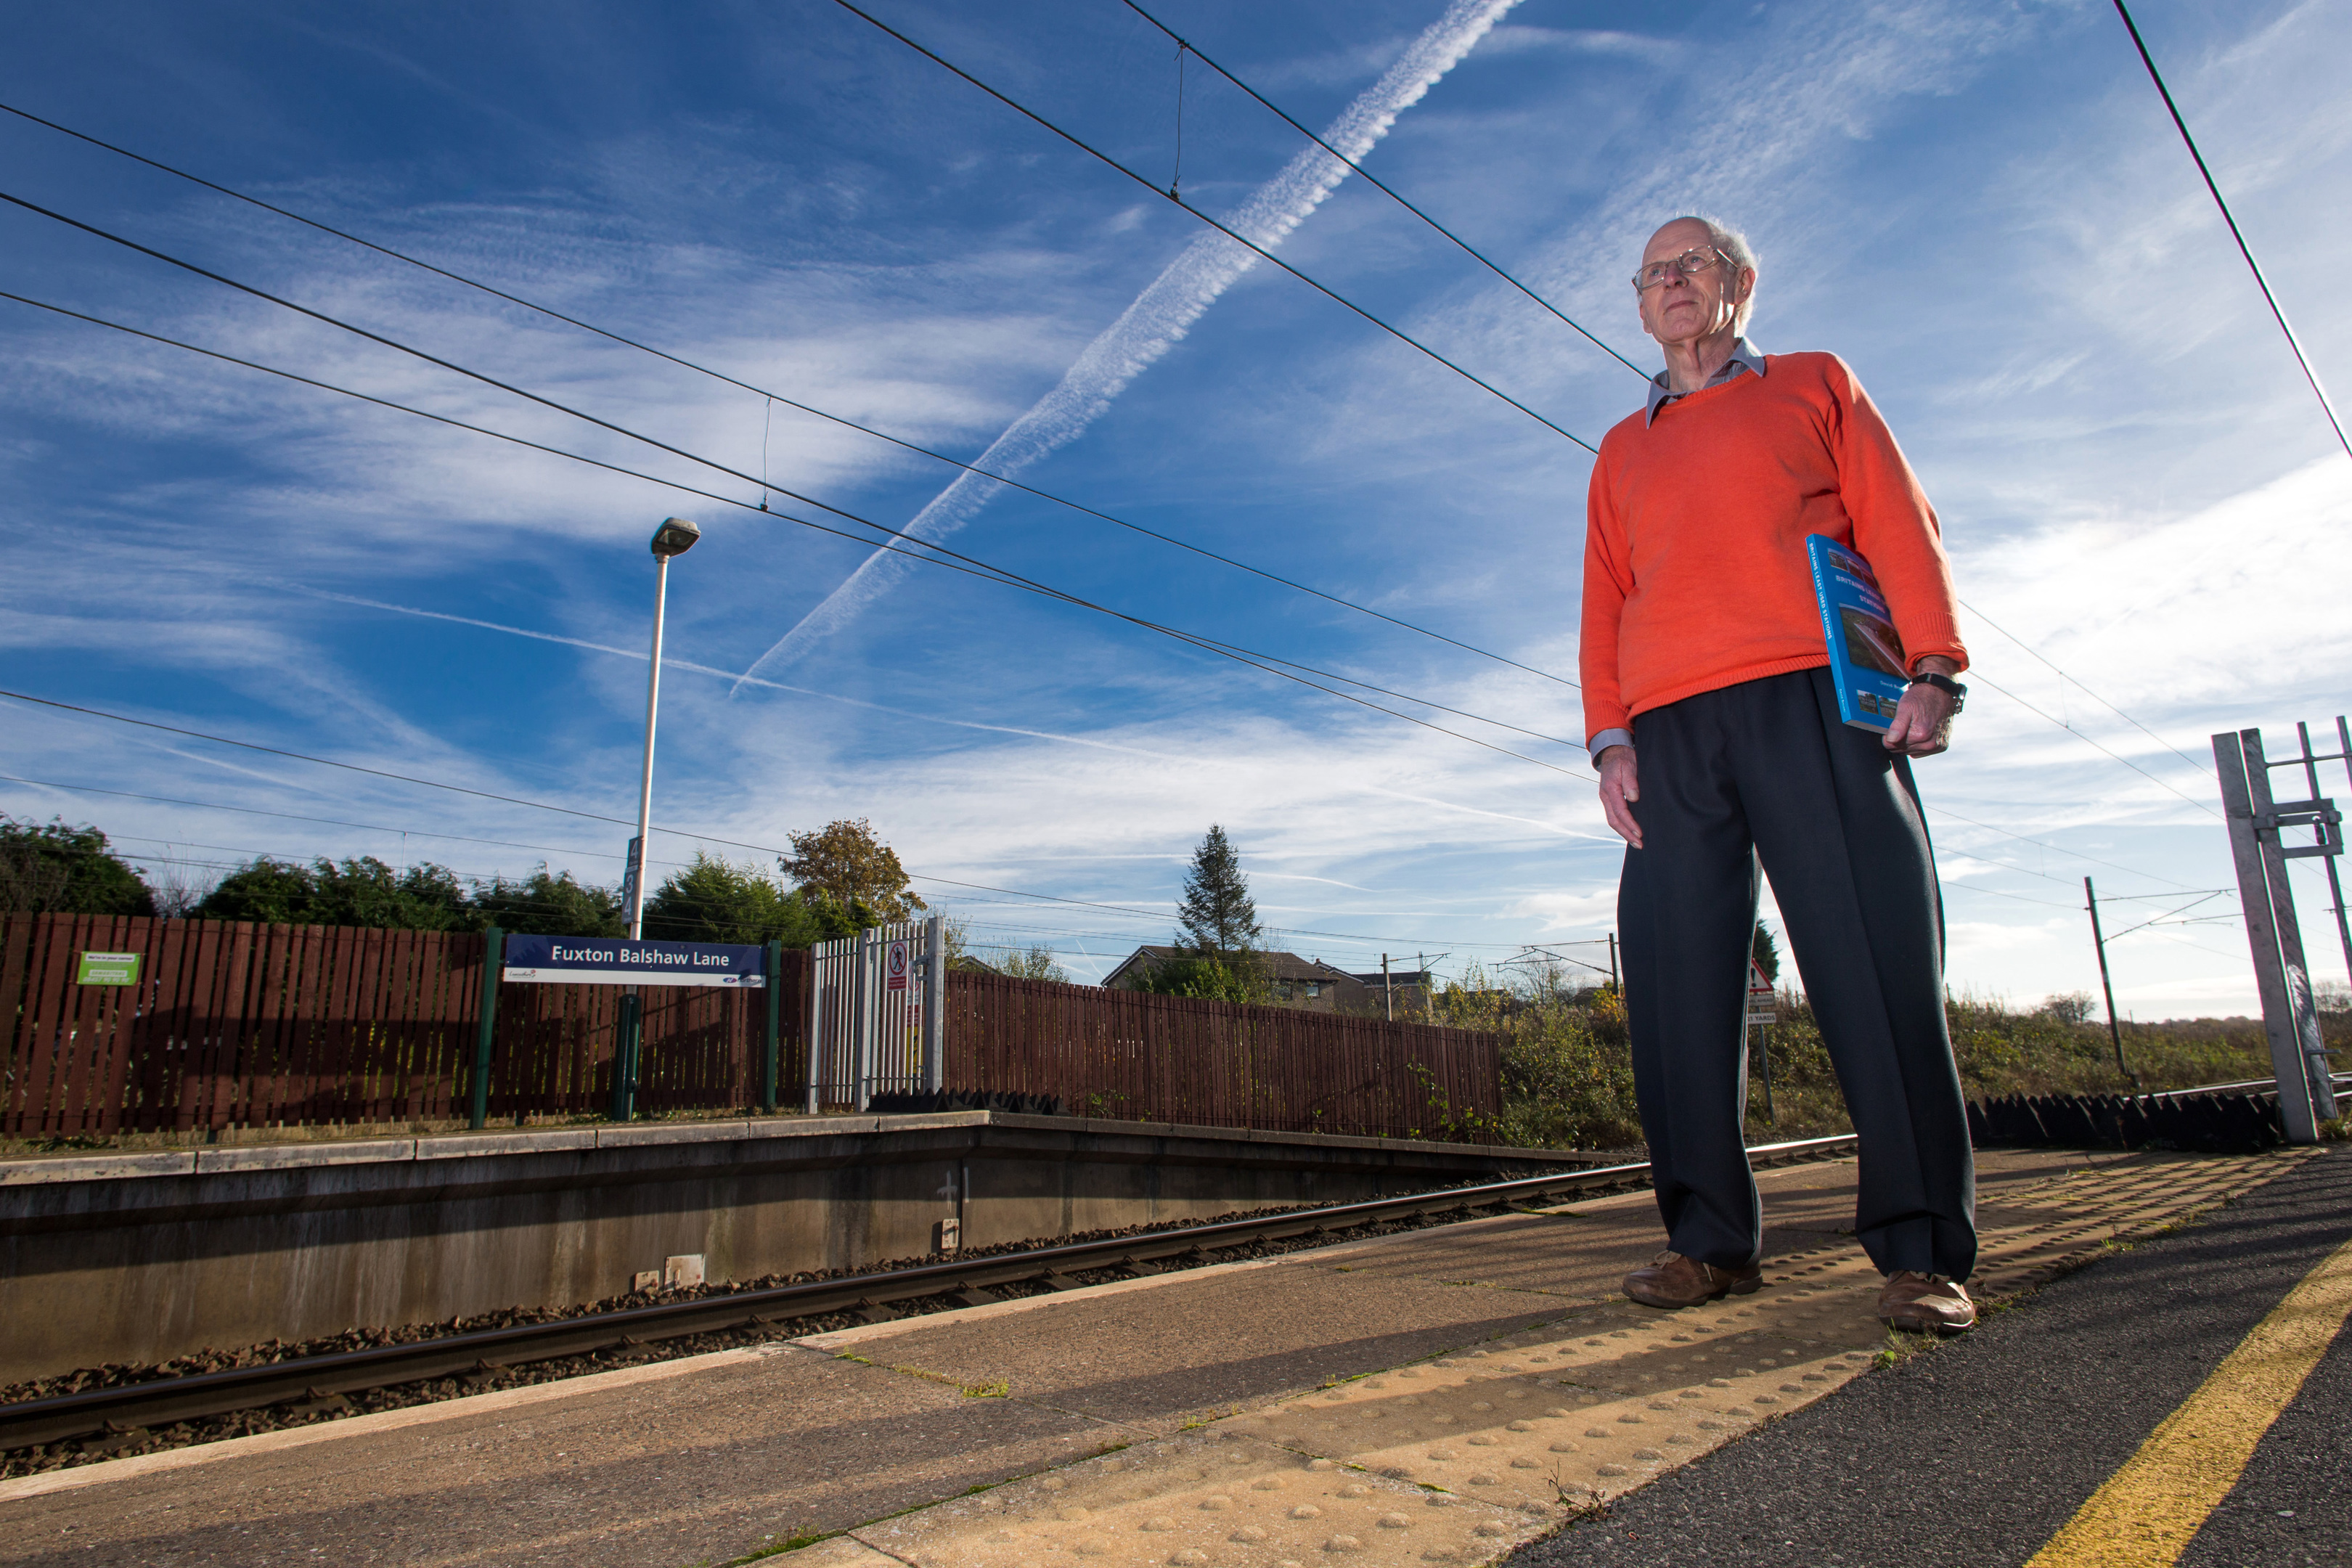 Author David Brewer, who has compiled a list of Britain's 200 least used train stations (Barry Collier)